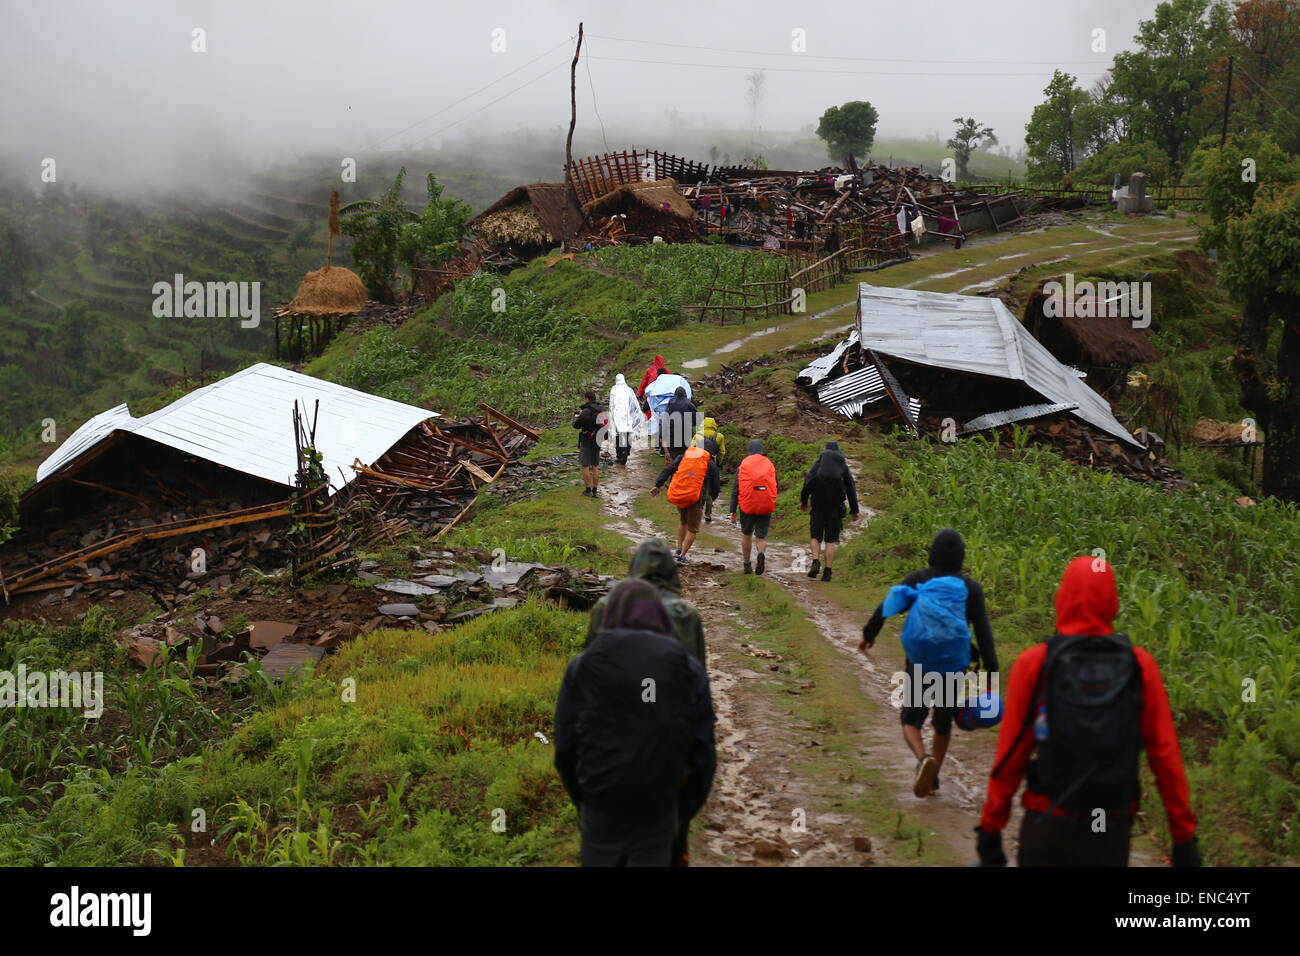 A group of tourists climb down from Barpak in the region of Saurpani in the Gorkha district, near the epicenter of the earthquake in Nepal, 28 April 2015. German tourist Jordane Schoenfelder and other foreigners have set up a medical and aid camp here for the locals - called base camp - which serves as a starting point for hikes in the surrounding mountains and for shipments of aid packages. Photo: JORDANE SCHOENFELDER/dpa Stock Photo